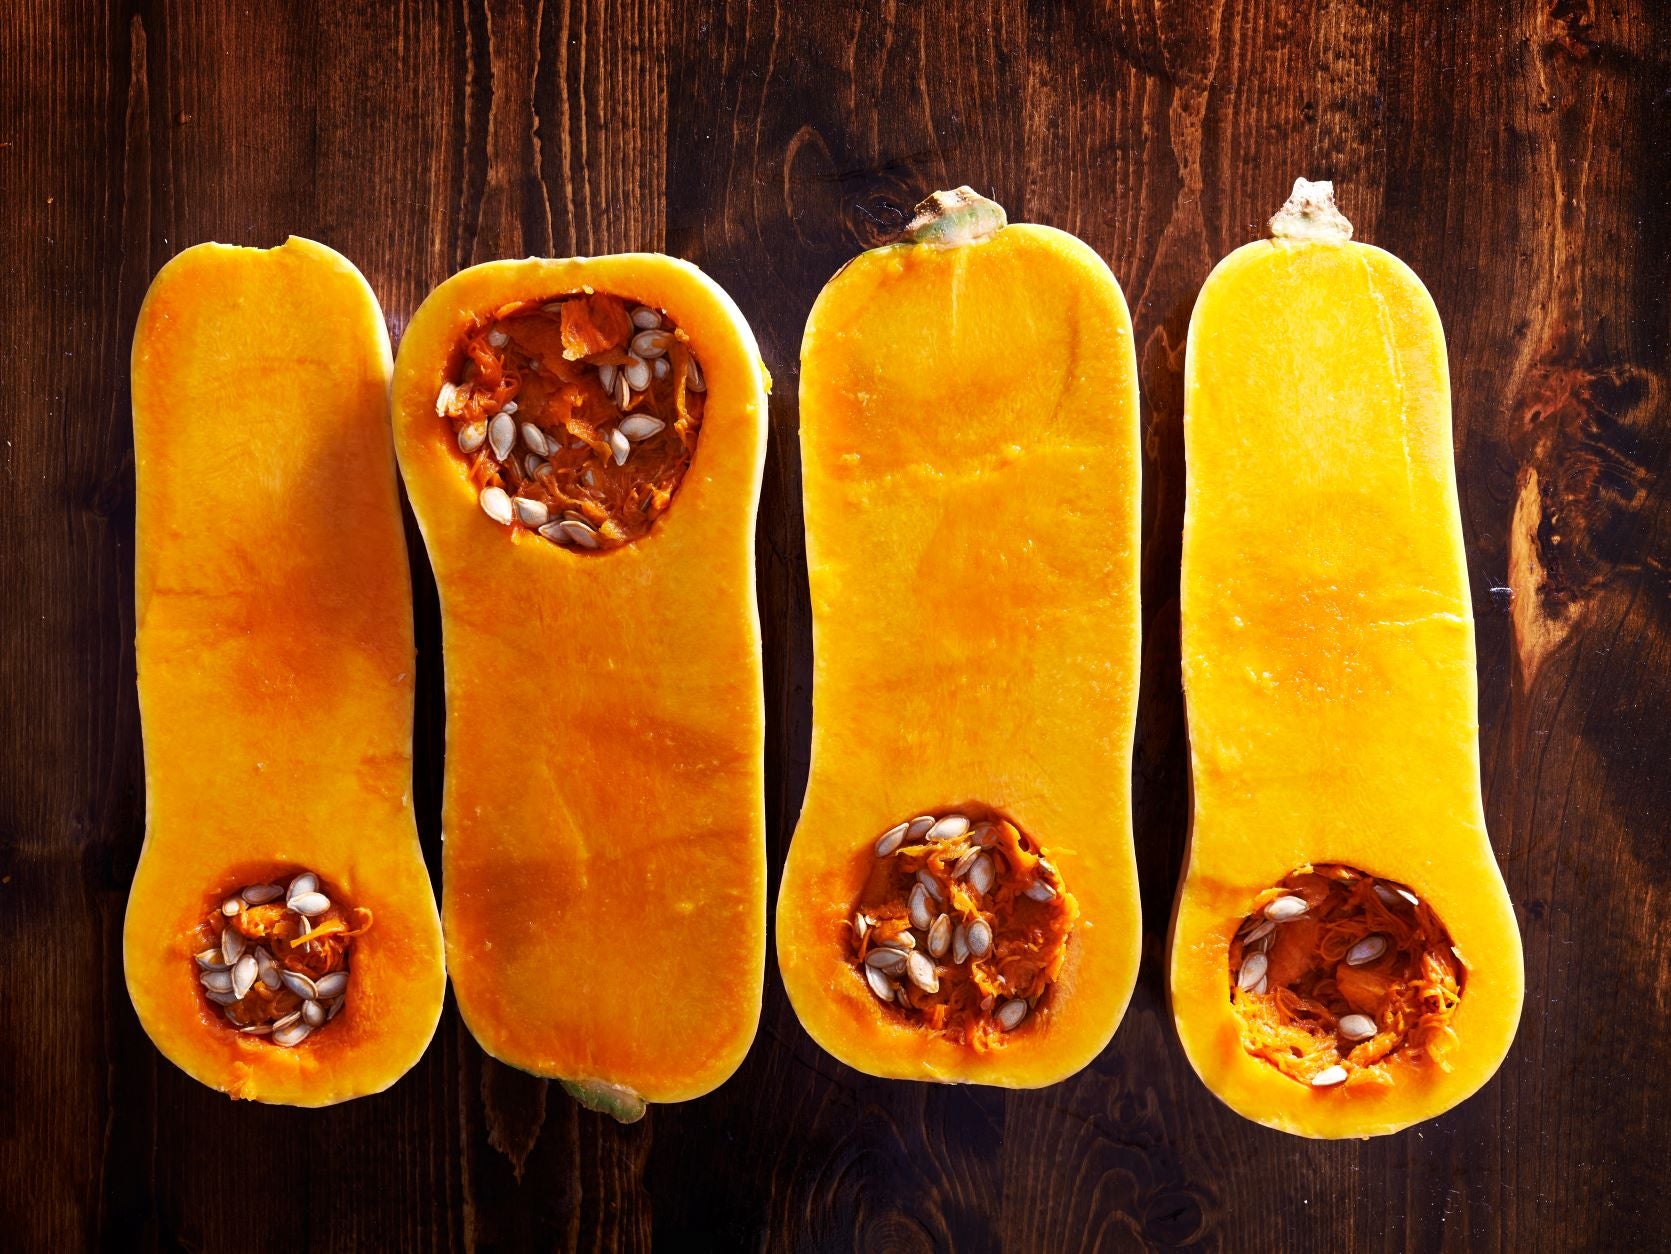 Four sliced halves of butternut squashes on a wooden surface. Butternut squash is a good first food for babies.